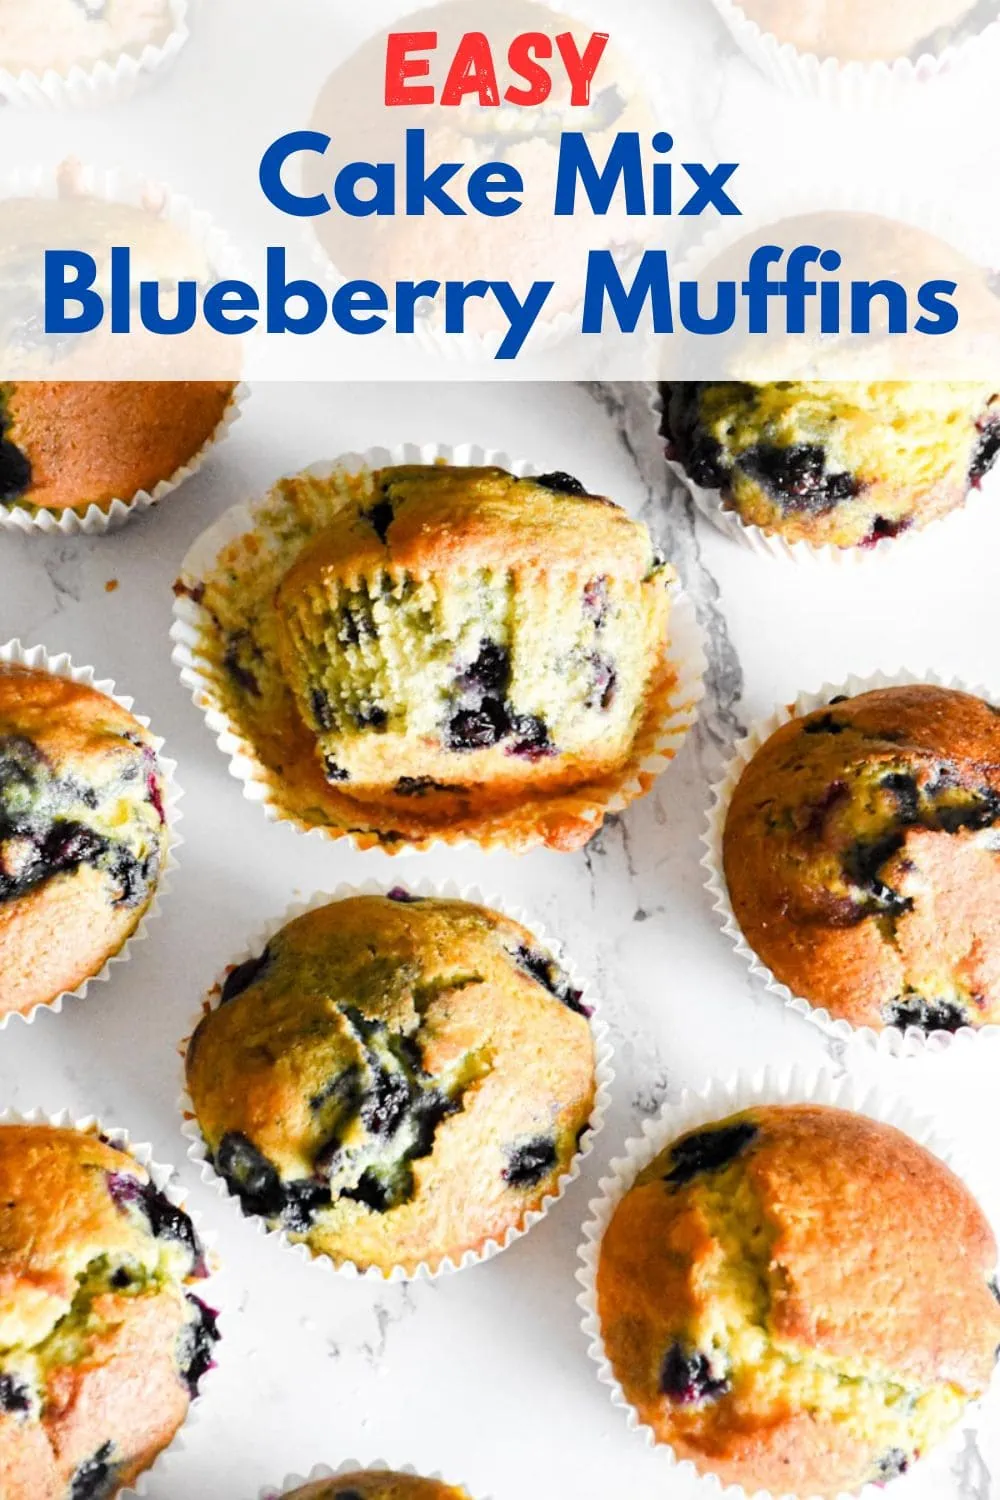 Easy Blueberry Muffin Cake Mix Recipe